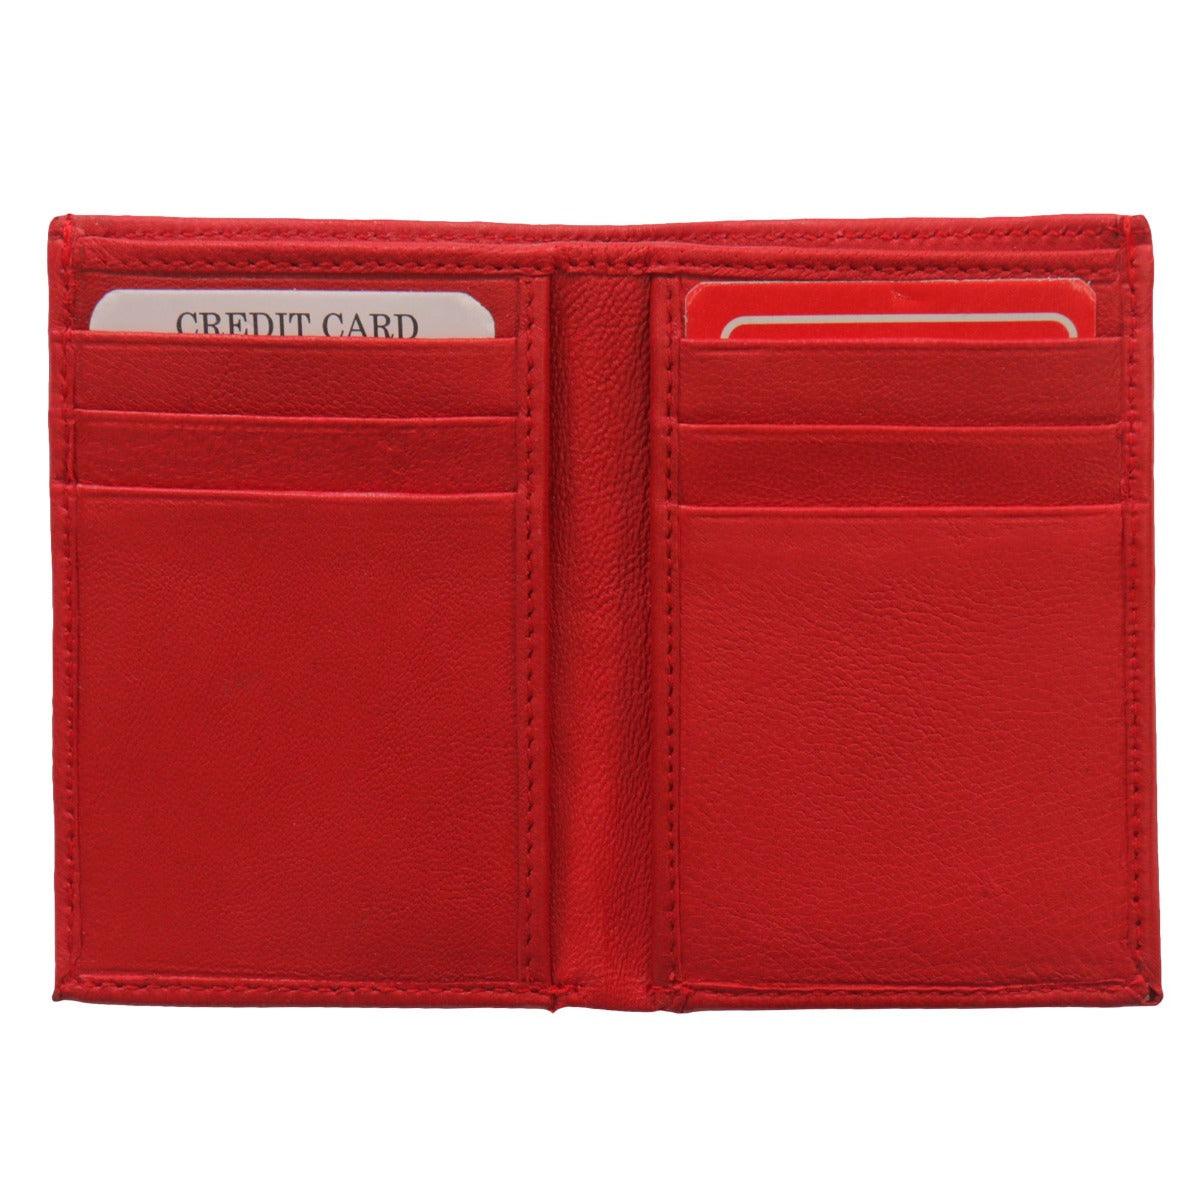 Hot Leathers Red Credit Card Holding Wallet - American Legend Rider